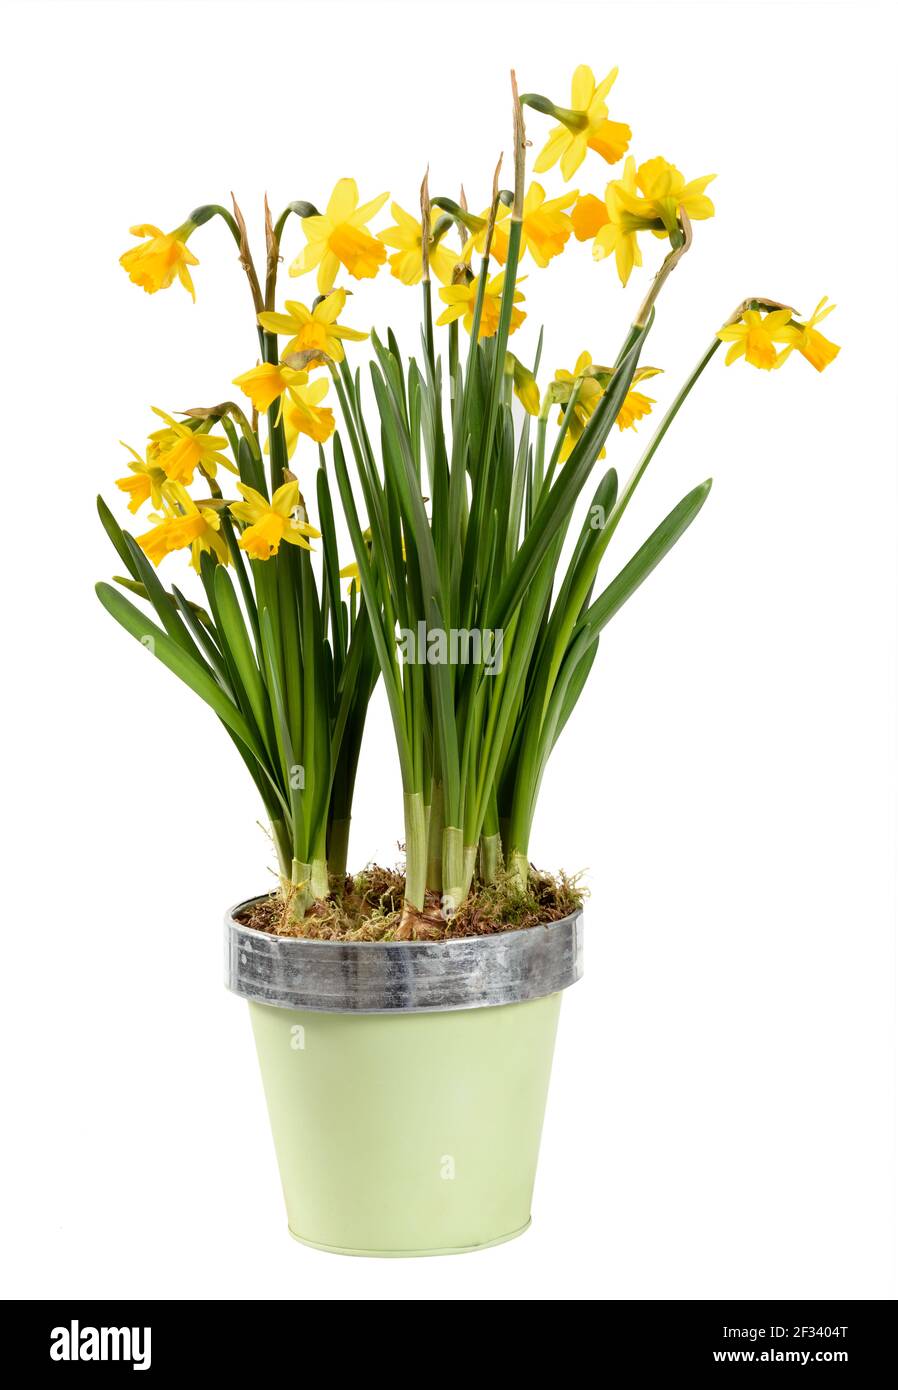 Colorful potted yellow daffodils or Narcissus plant with clusters of flowers in a side view isolated on white symbolic of the spring season Stock Photo